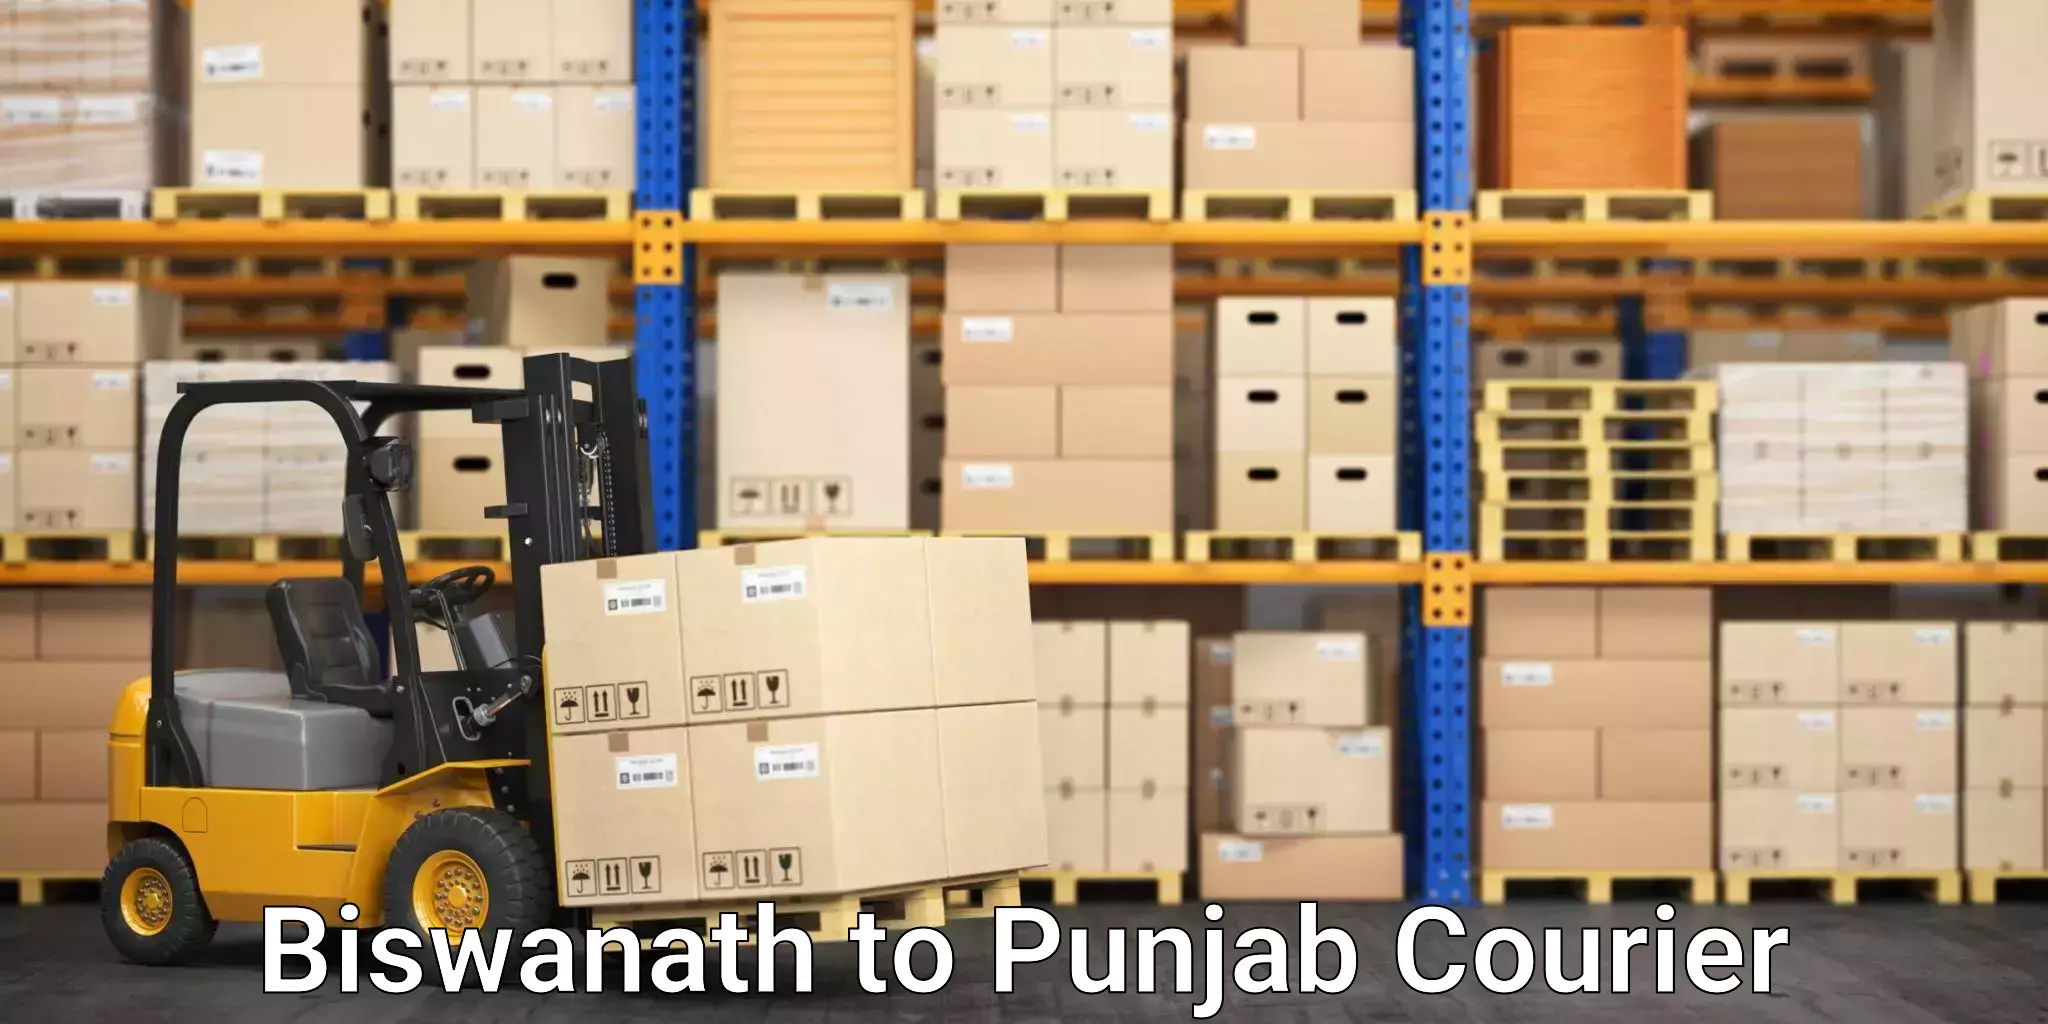 Courier app Biswanath to Amritsar